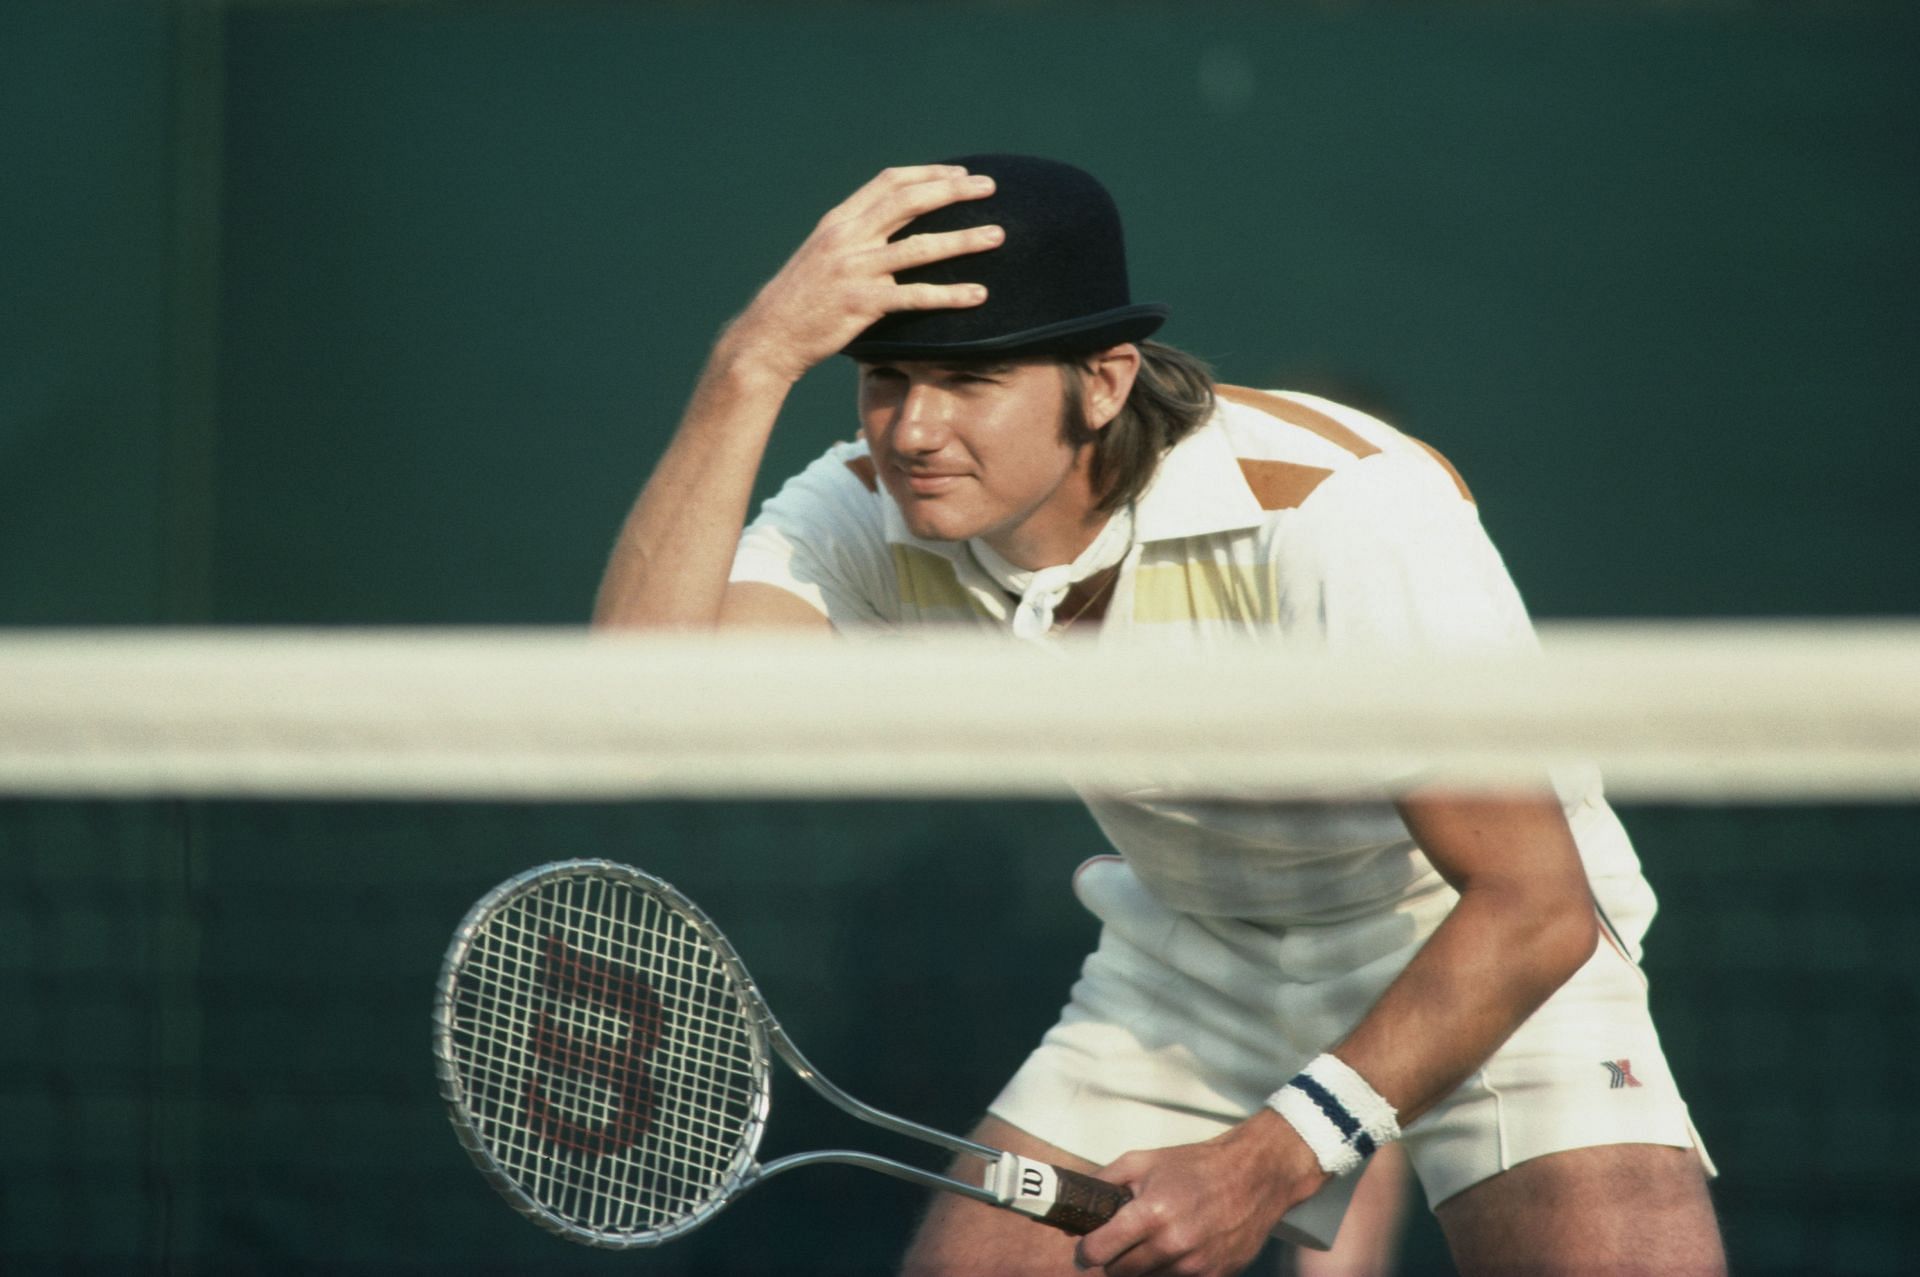 Jimmy Connors in action at the 1976 Wimbledon Championships